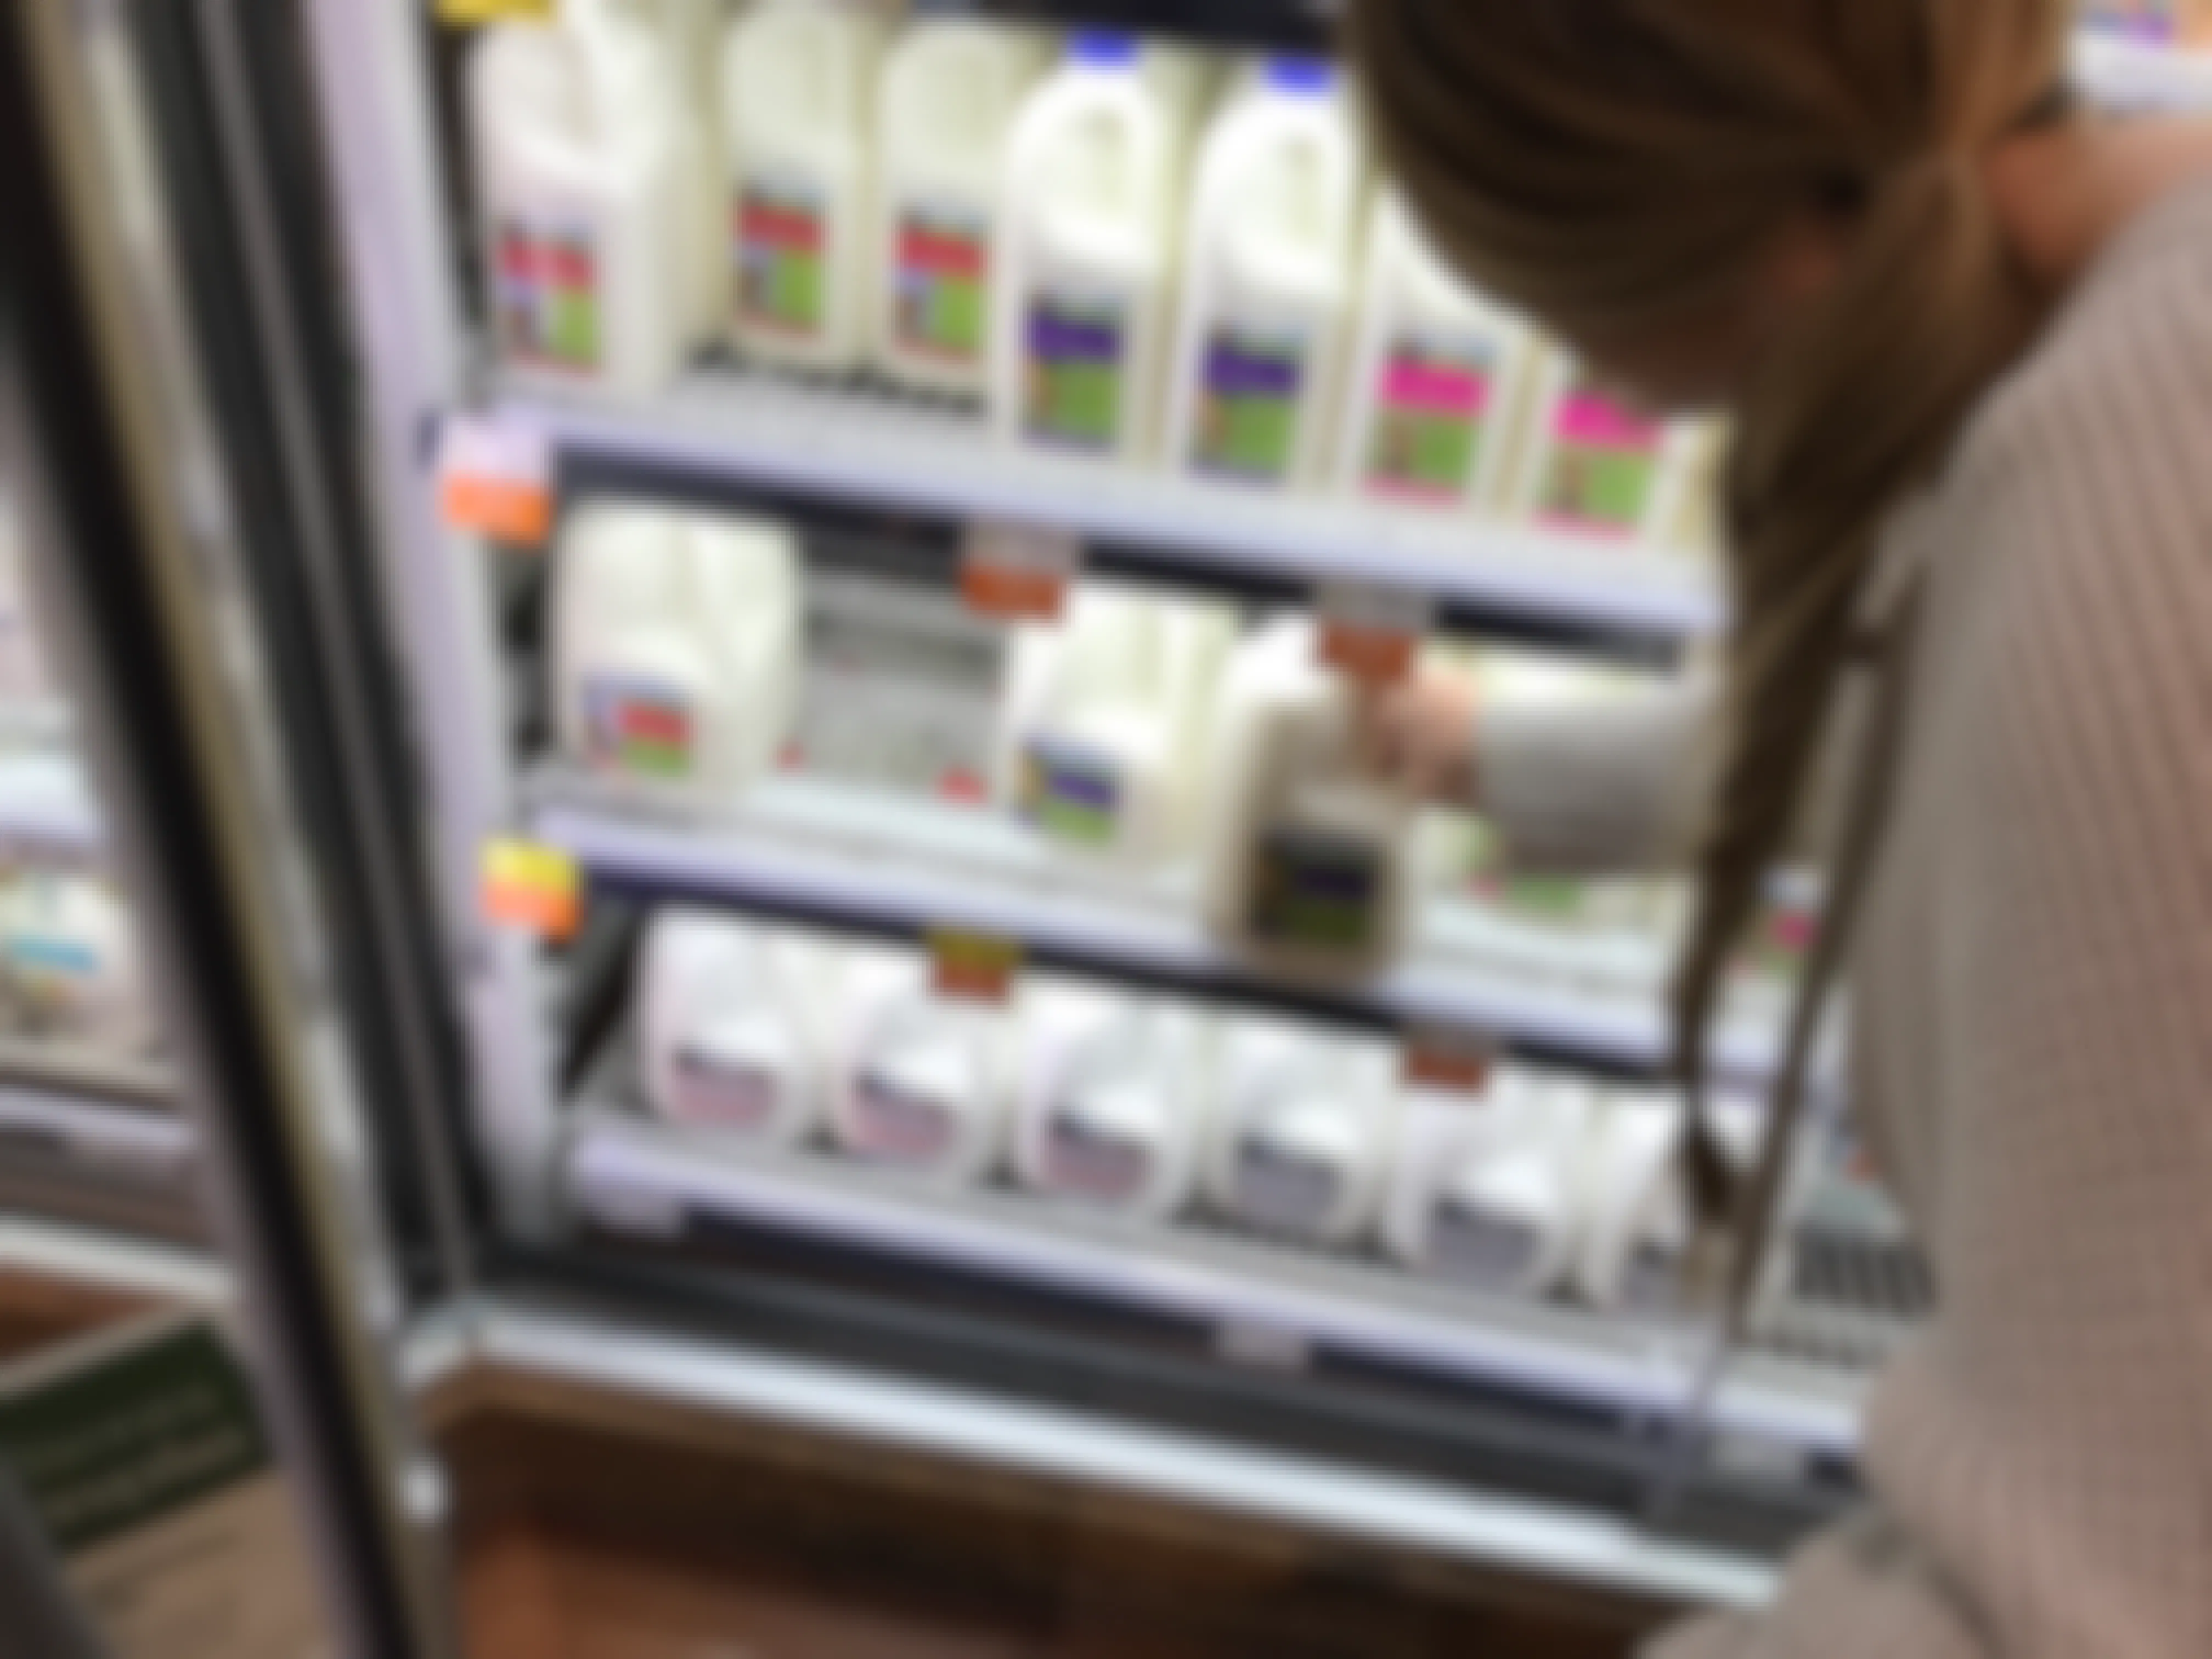 Woman reaching into a refrigerated case to grab a gallon of milk in a grocery store.